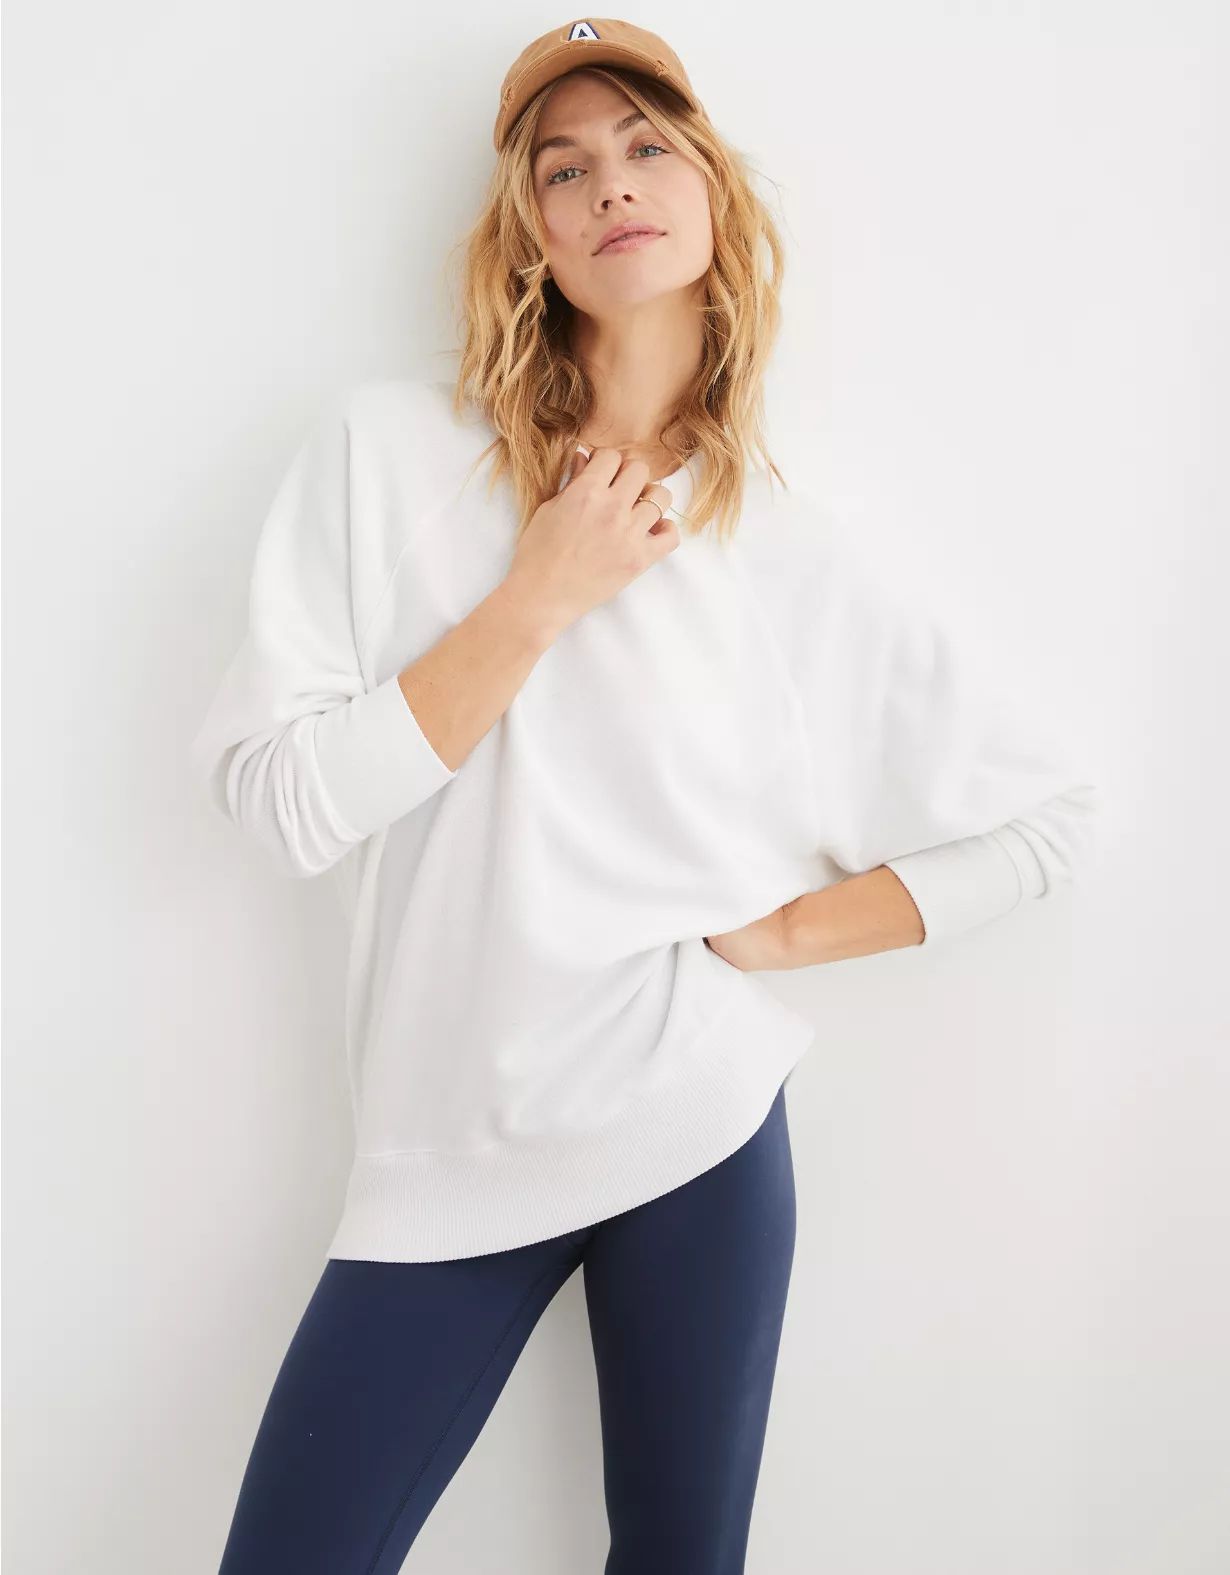 Aerie City Sweatshirt | American Eagle Outfitters (US & CA)